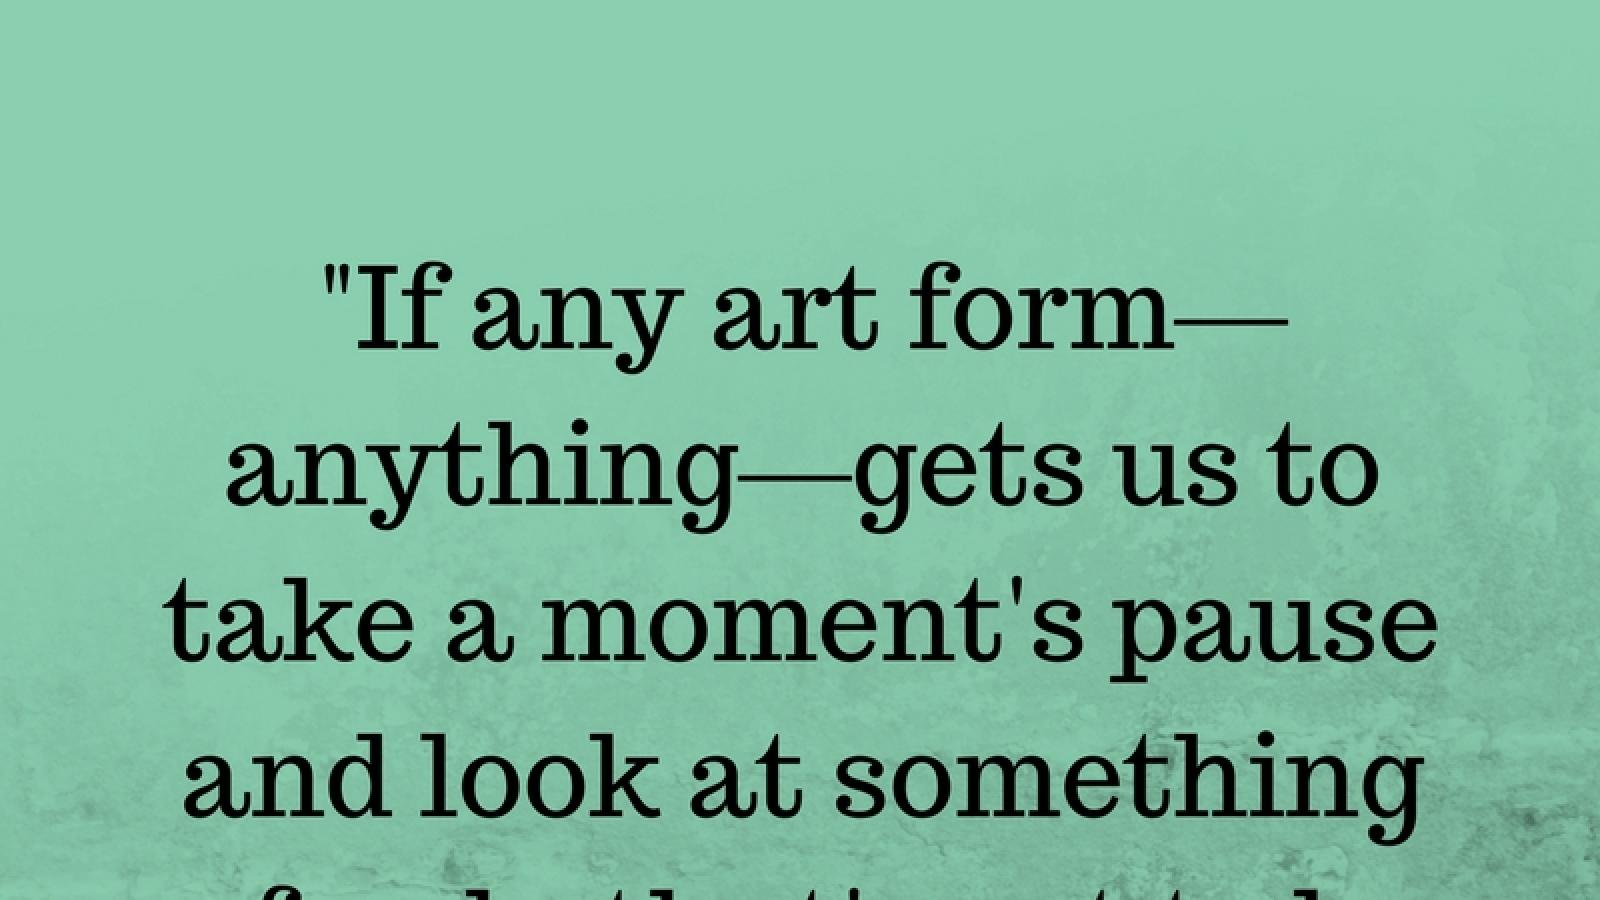 Quote by artist and architect Maya Lin